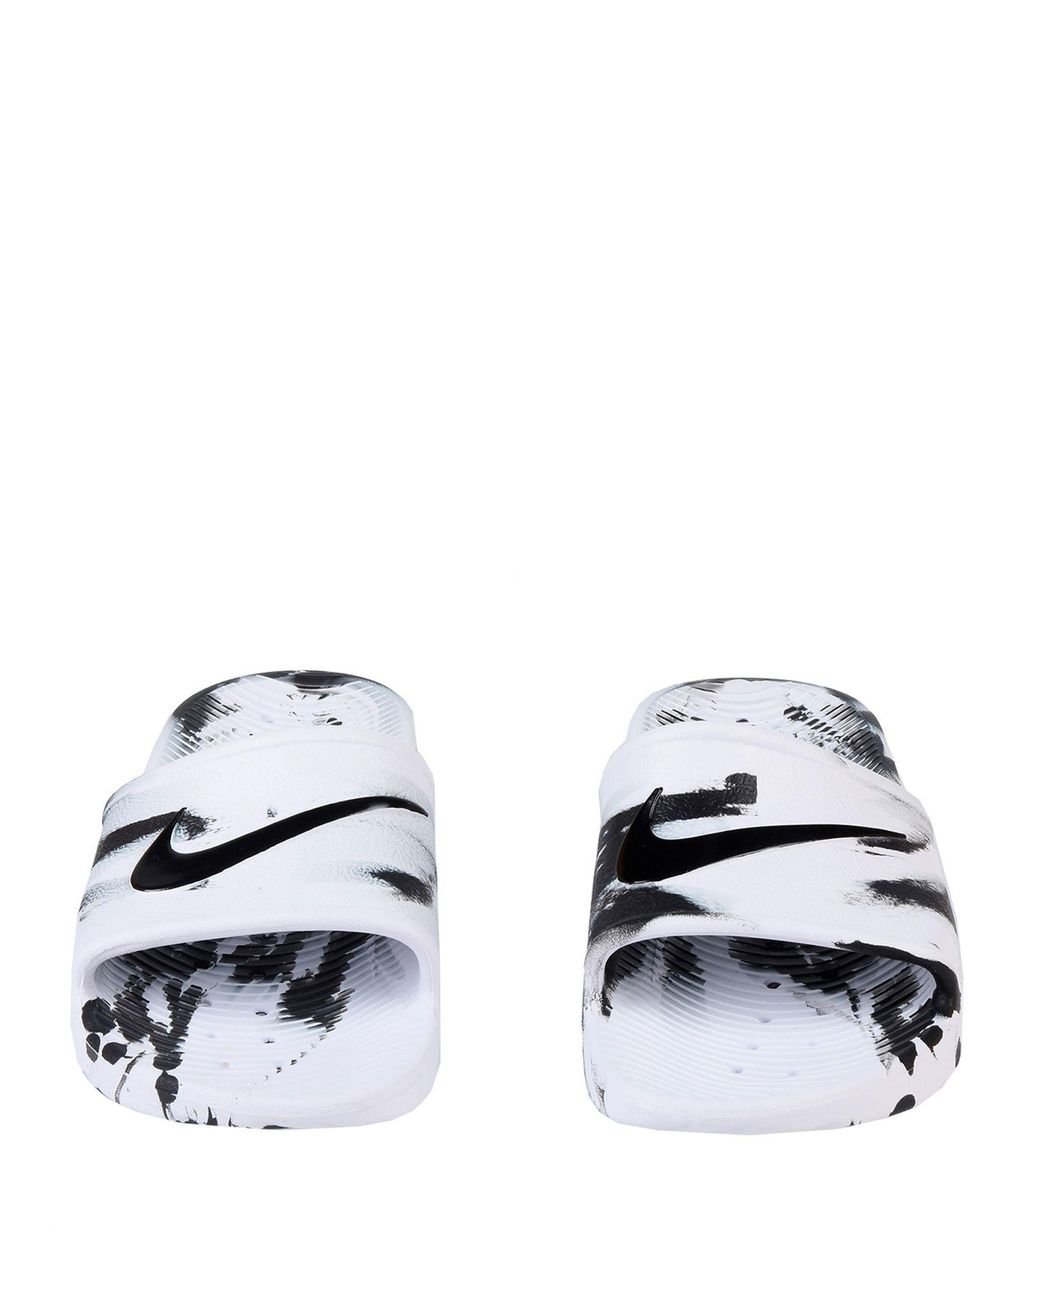 Victori One Slides: Fashionable Unisex Rubber Supportive Slippers For Women  For Summer Beach And Outdoor Casual Wear White/Black Printing From  Top_aj_suppliers, $9 | DHgate.Com